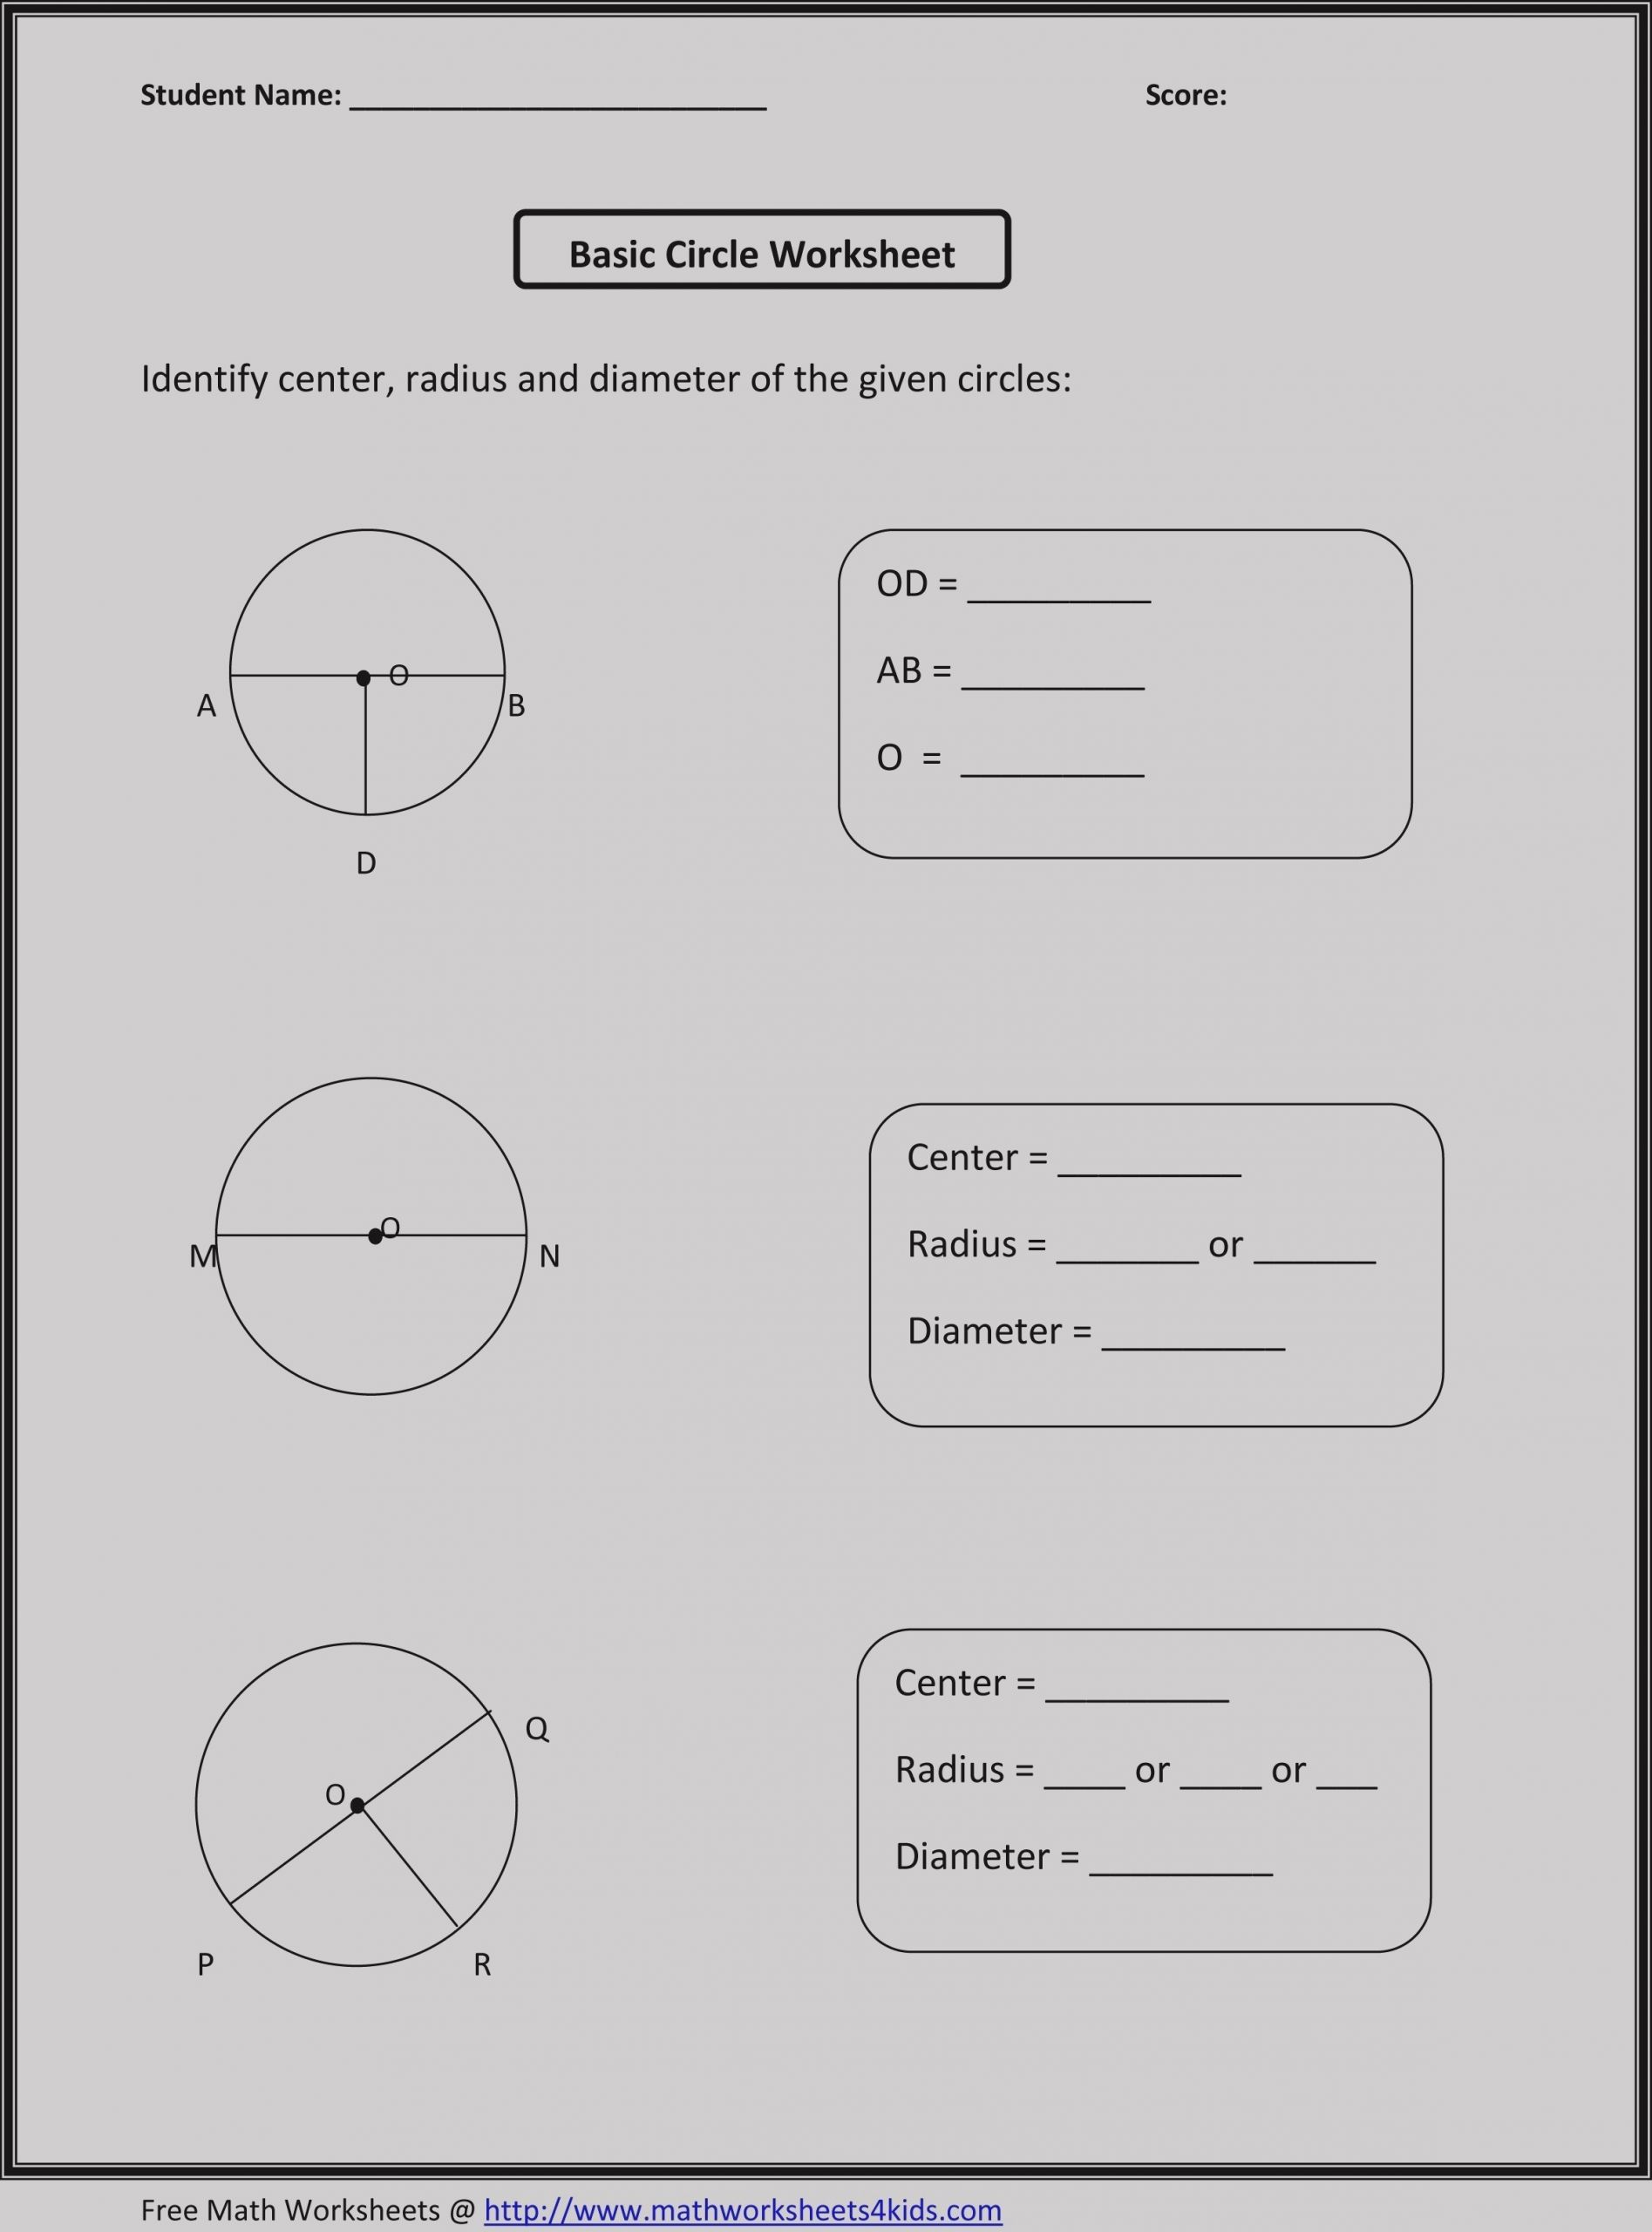 Free Math Worksheets Second Grade 2 Multiplication Multiply 2 Times whole Tens